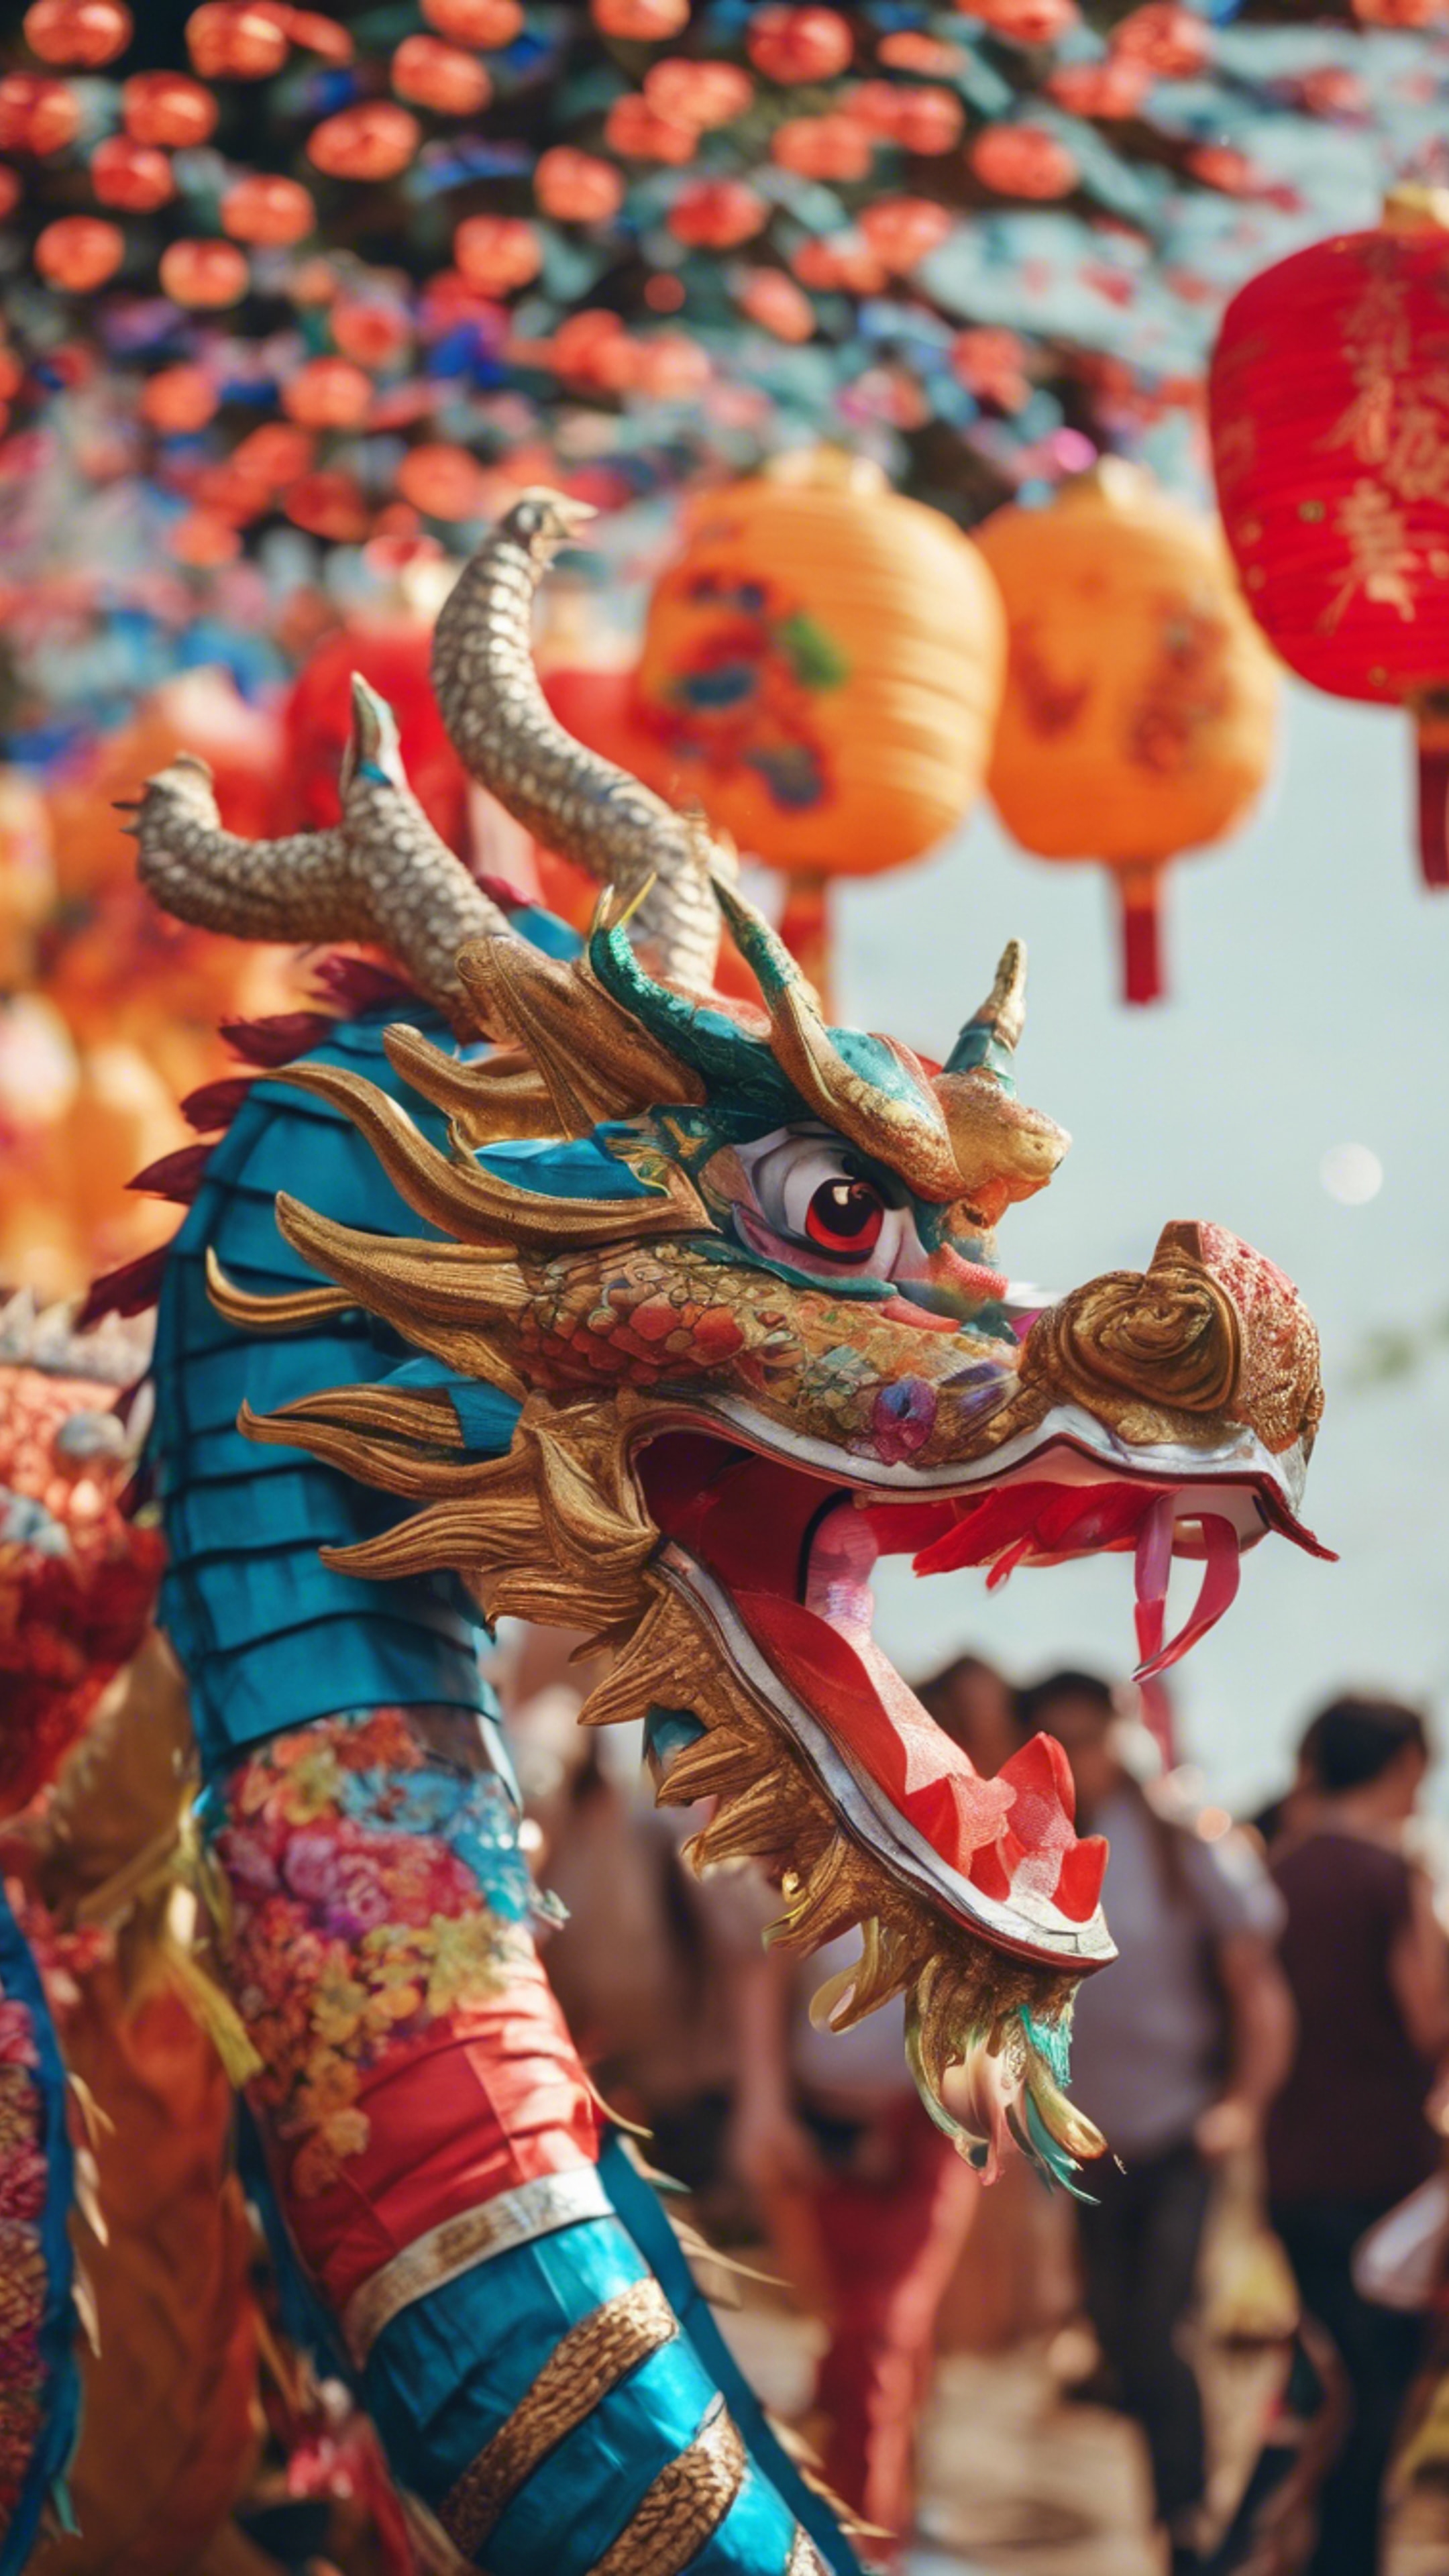 An oriental-style dragon parading amidst a colorful festival with paper lanterns. Обои[5877da5b29174274b3e8]